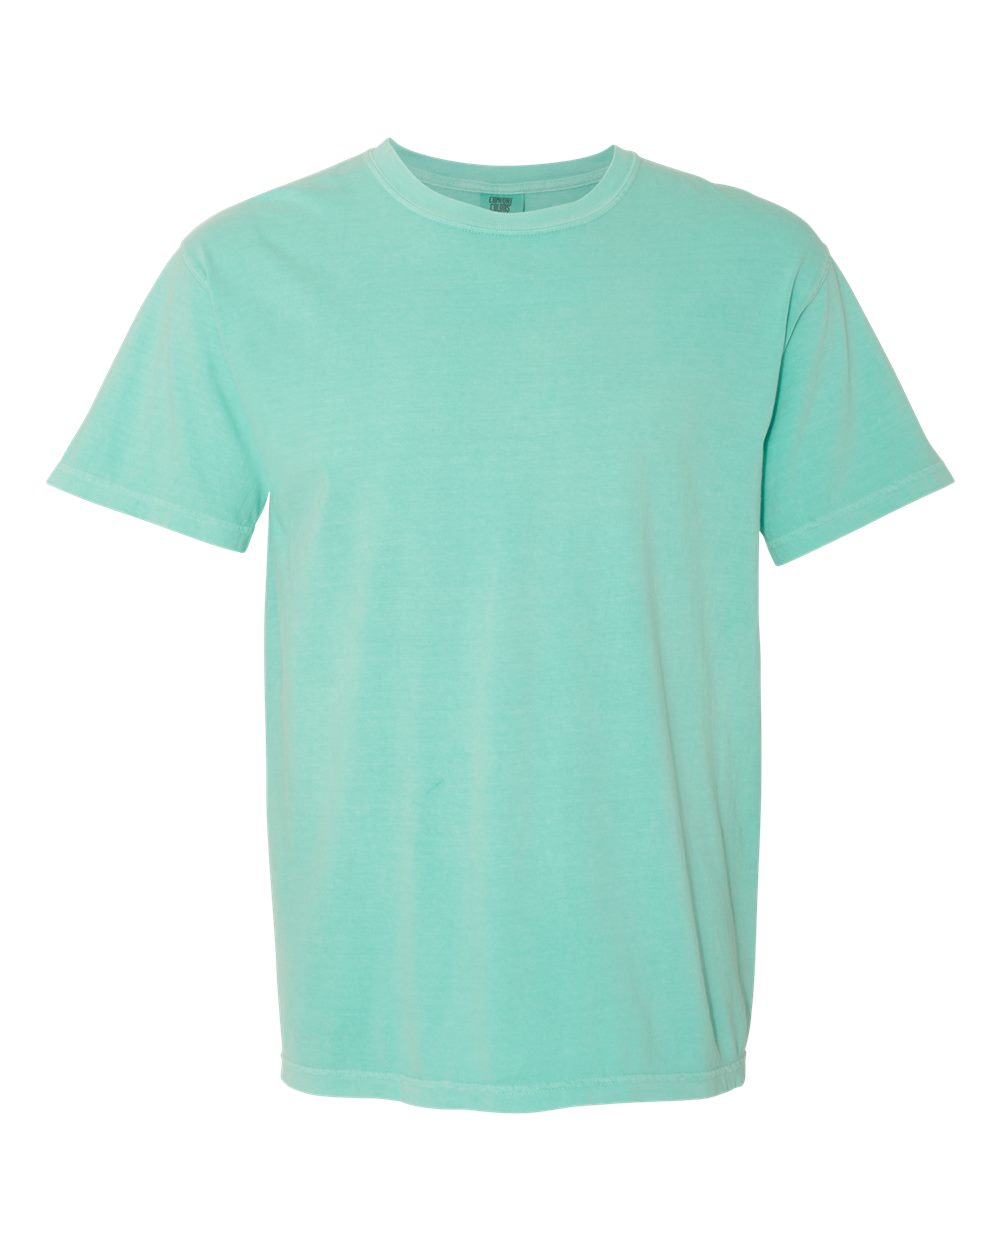 Soul Full of Sunshine - Chalky Mint Tee